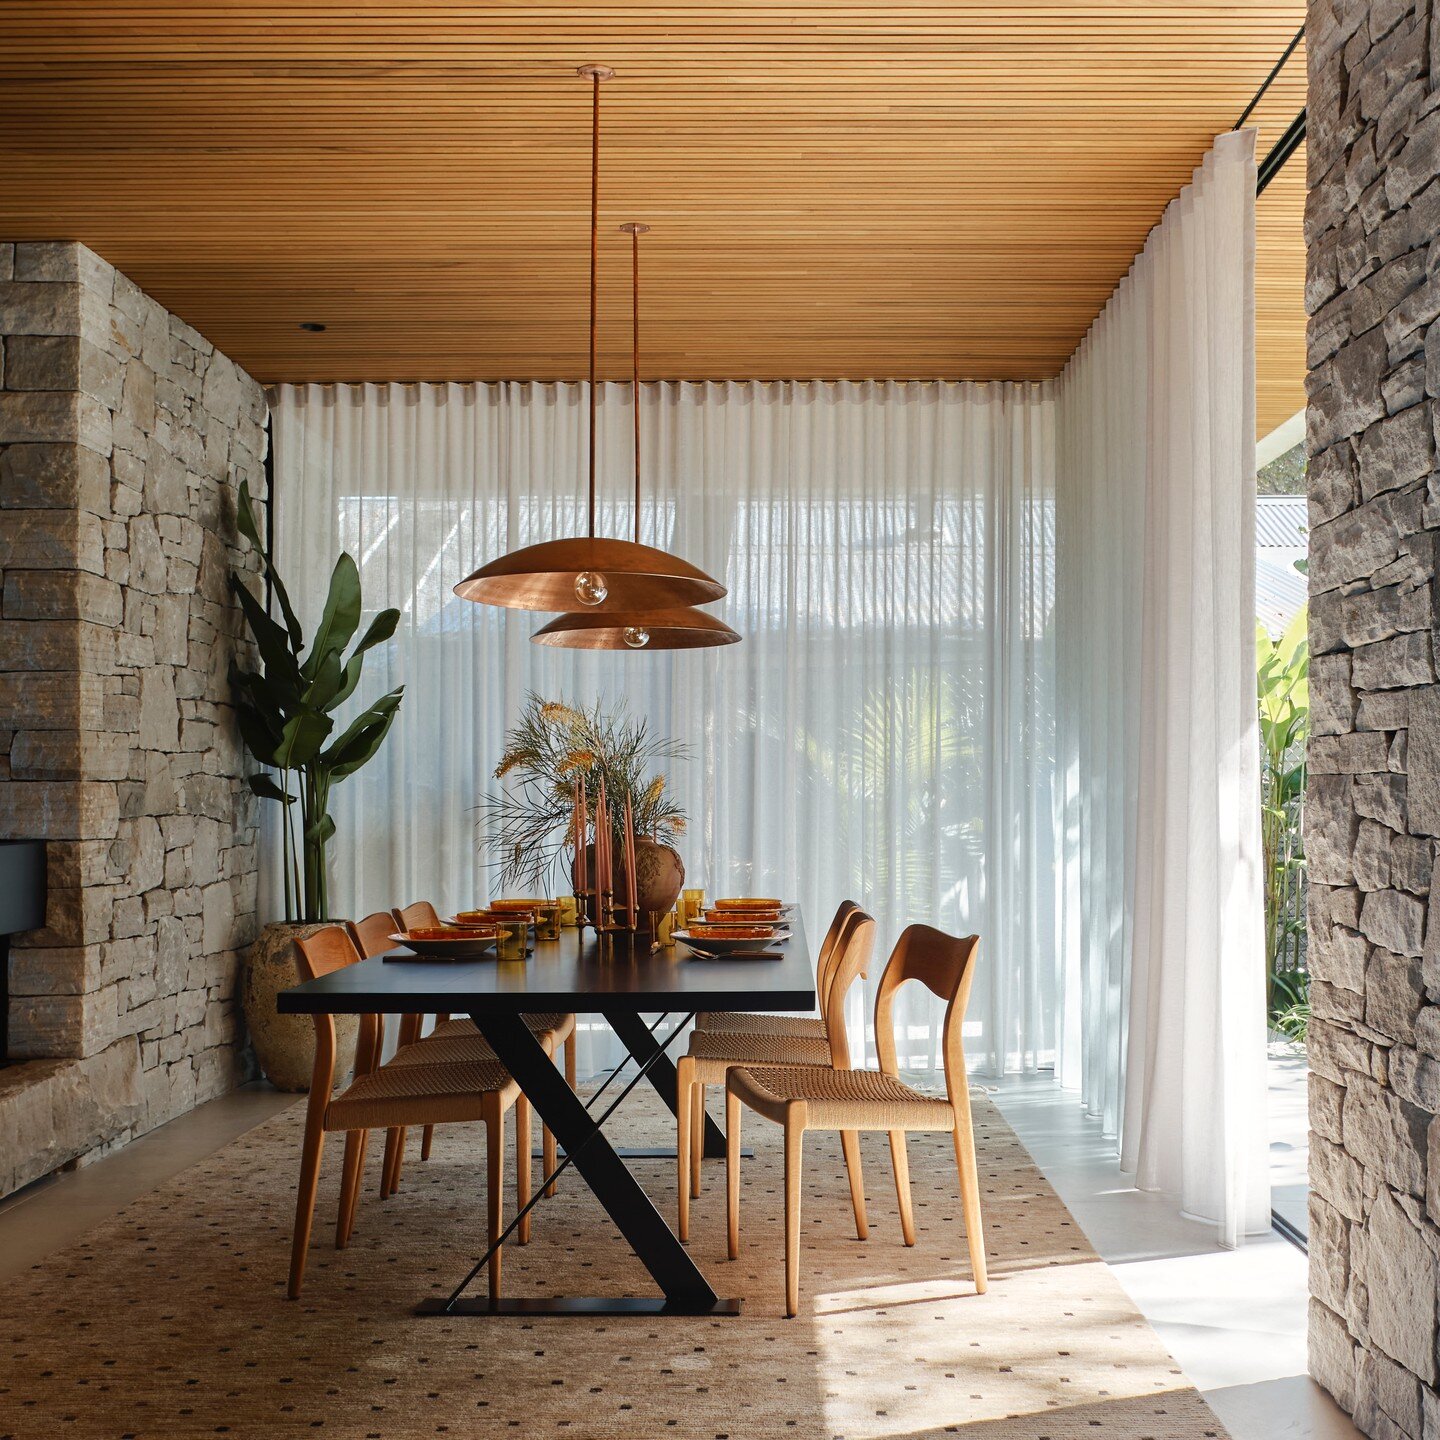 We love the warmth of this dining space, highlighted by the incredible stonework, timber cladded ceilings &amp; light coming through the sheer curtains. Definitely a welcoming space for a meal.